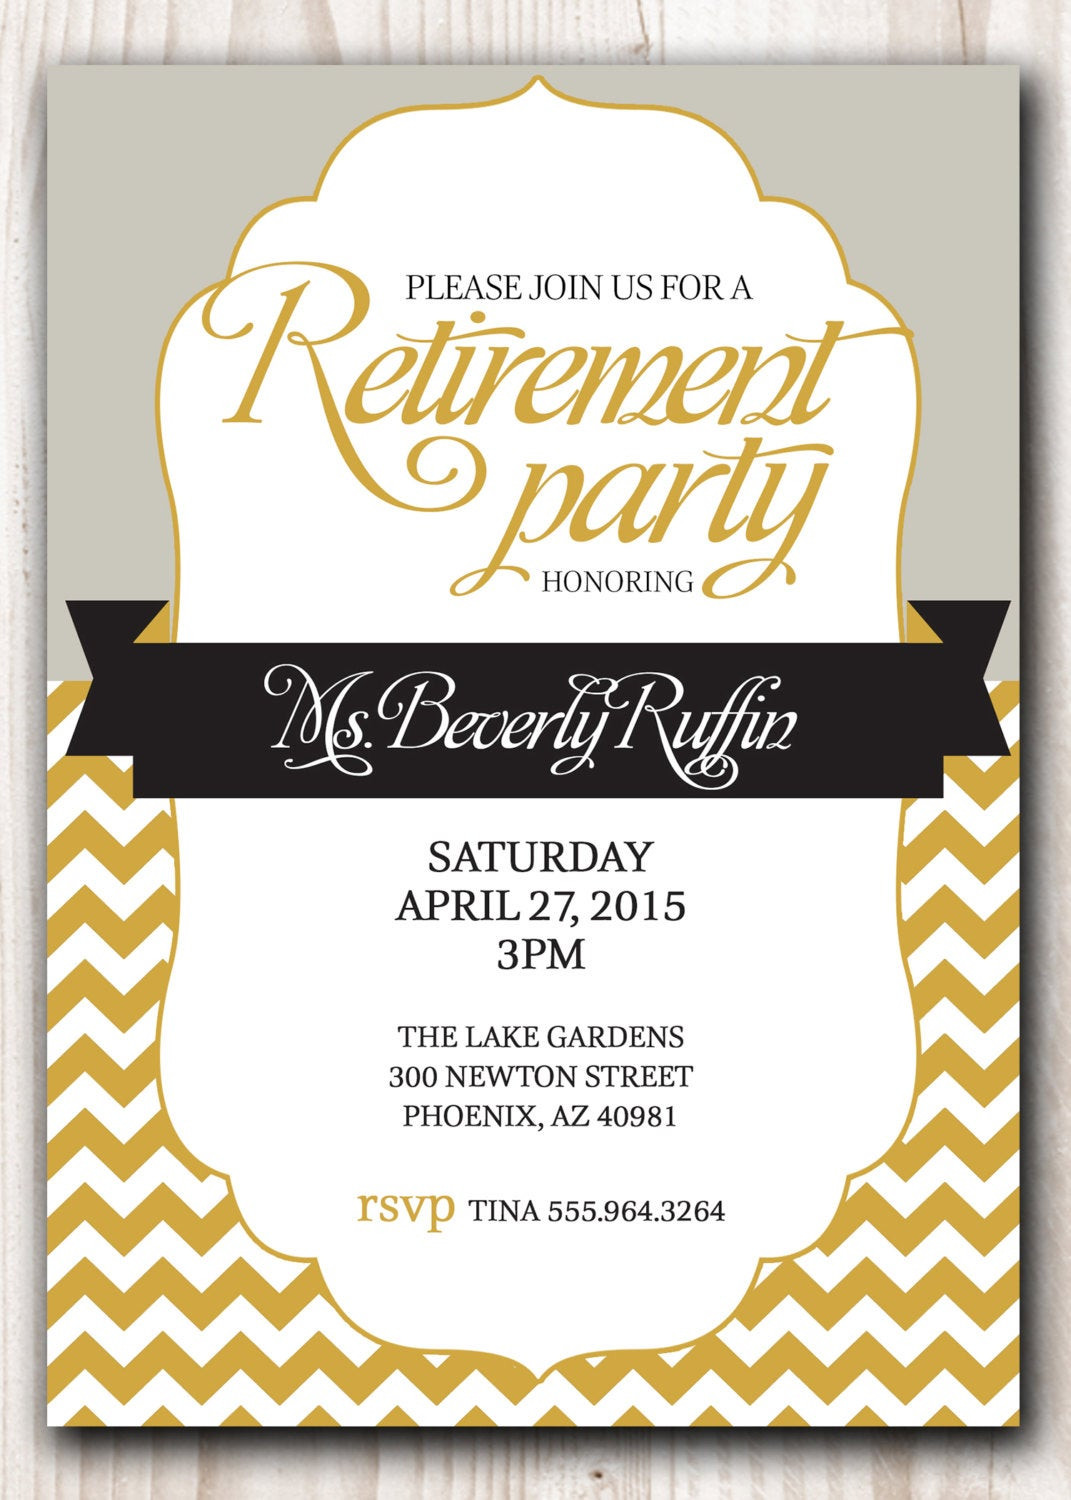 Retirement Party Invitation Ideas
 RETIREMENT PARTY Invitation Gold and Silver or Pick any Color